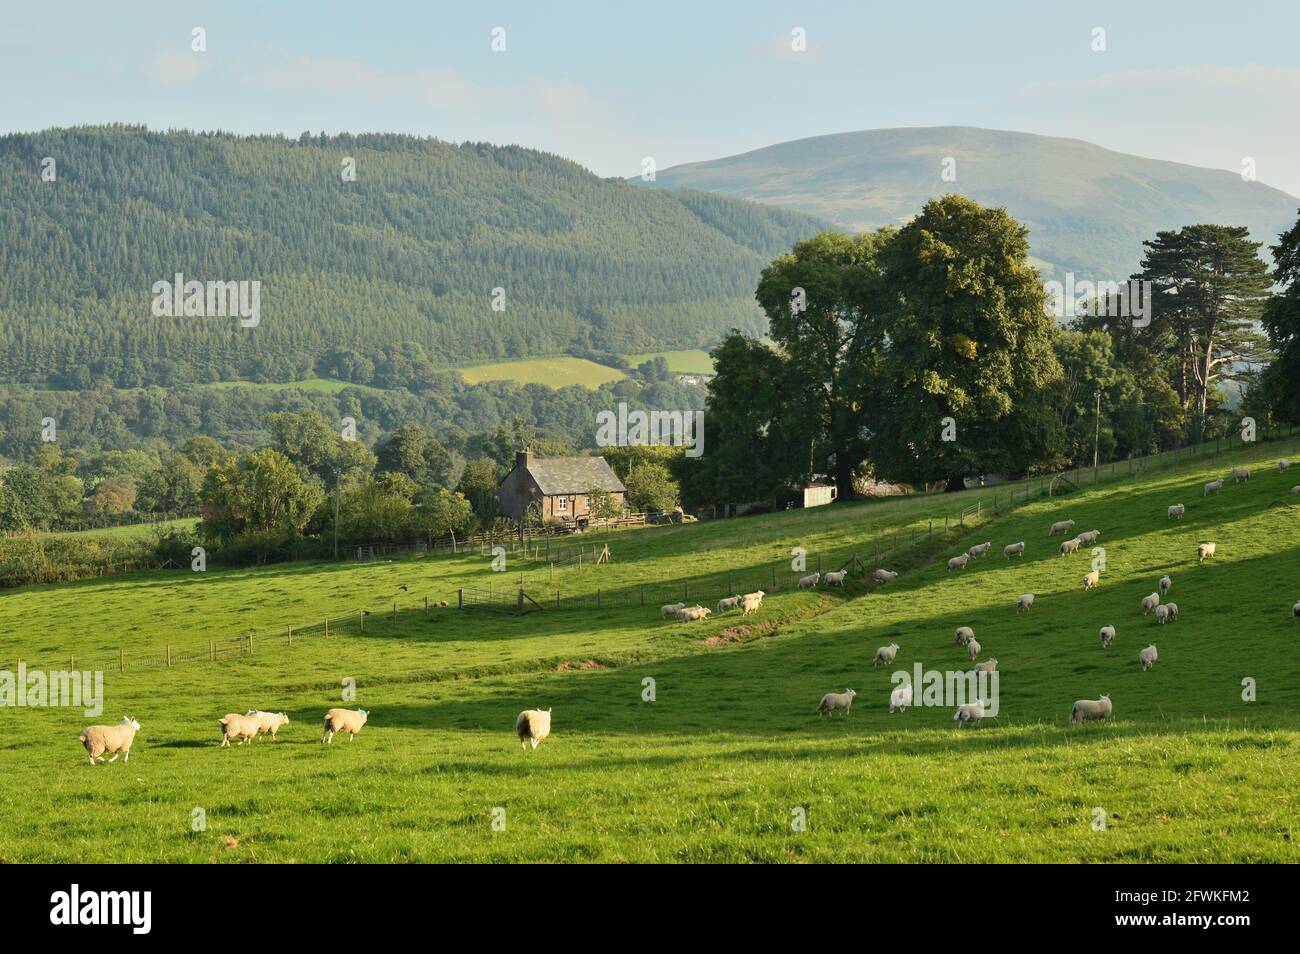 Sheep frolicking in a farm field during the late afternoon. Brecon Beacons National Park, Wales, UK. Stock Photo